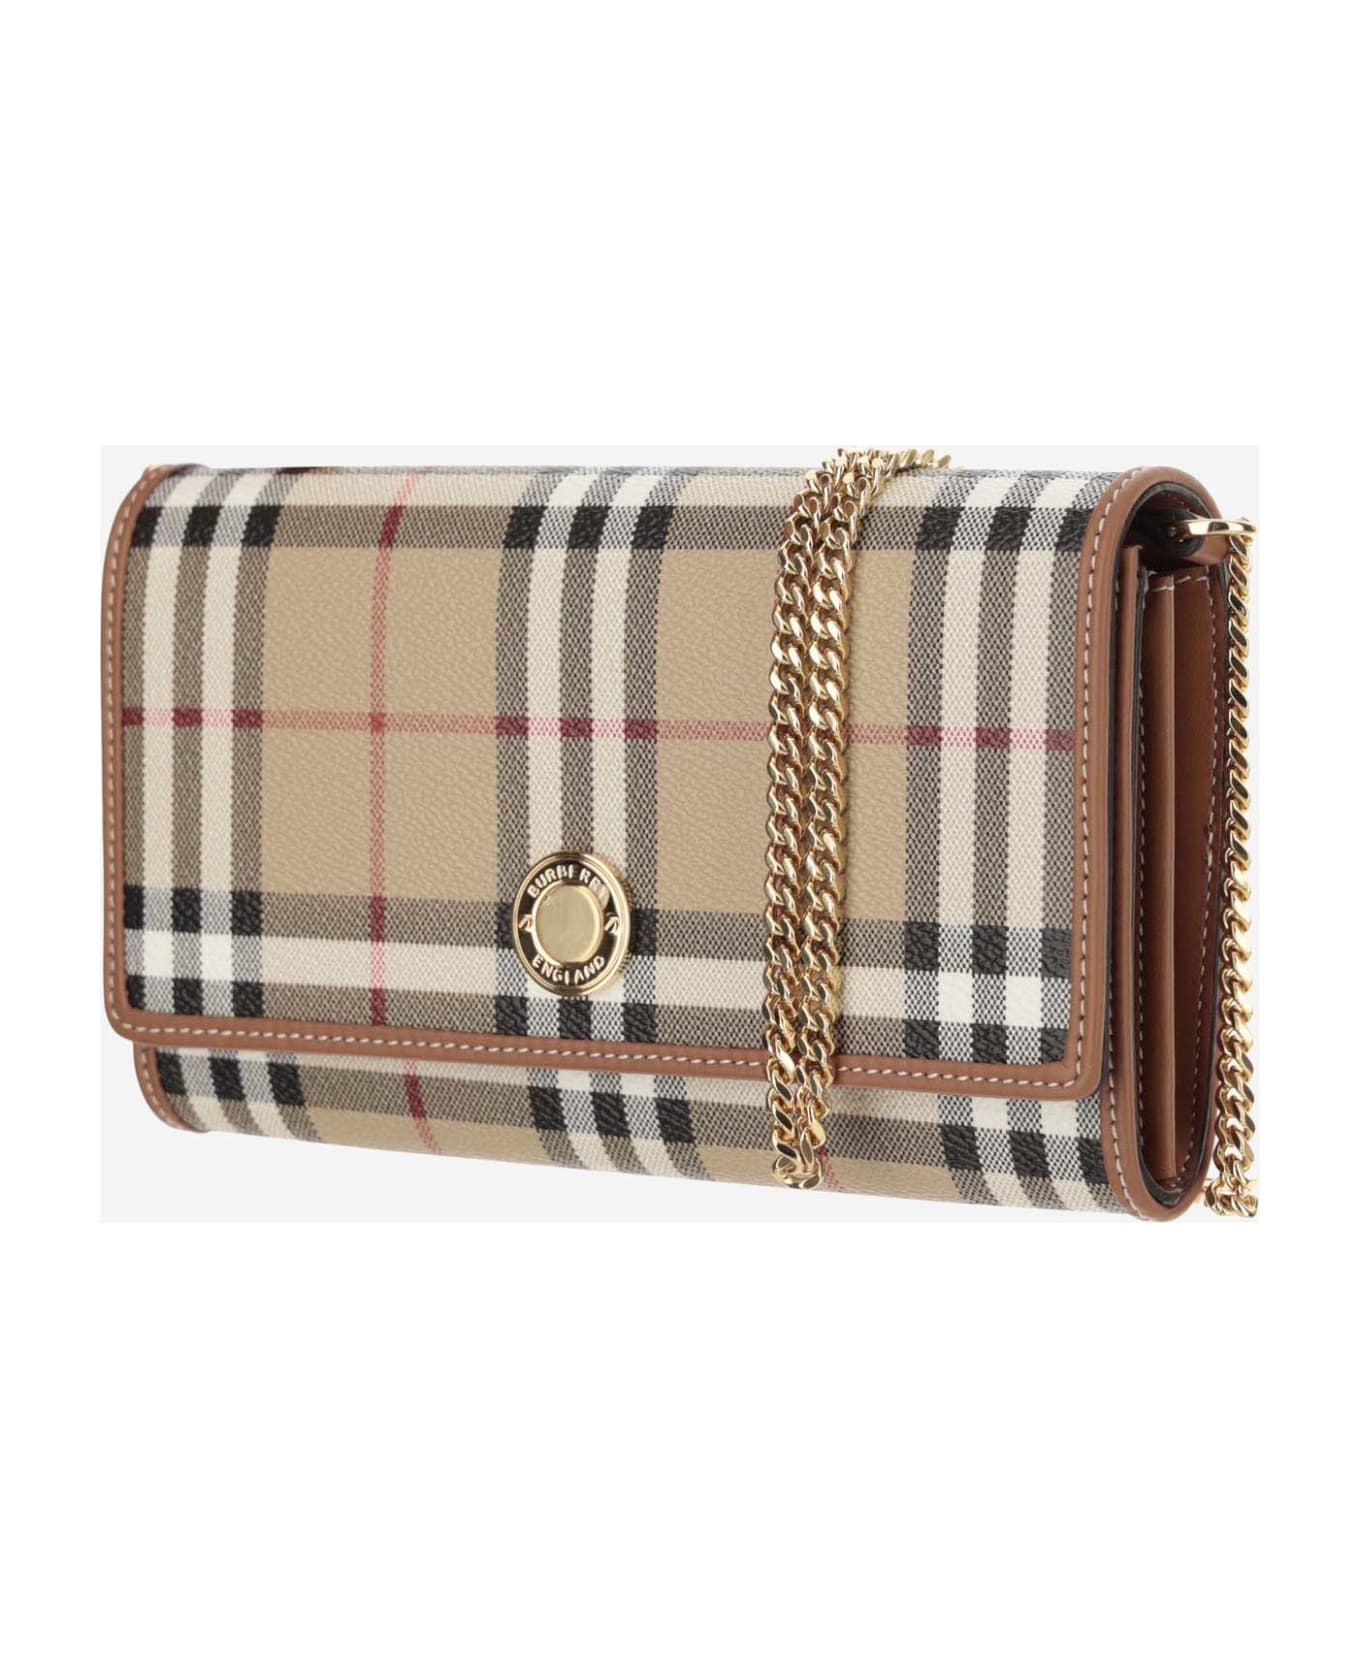 Burberry Check Wallet With Chain Strap - Red クラッチバッグ